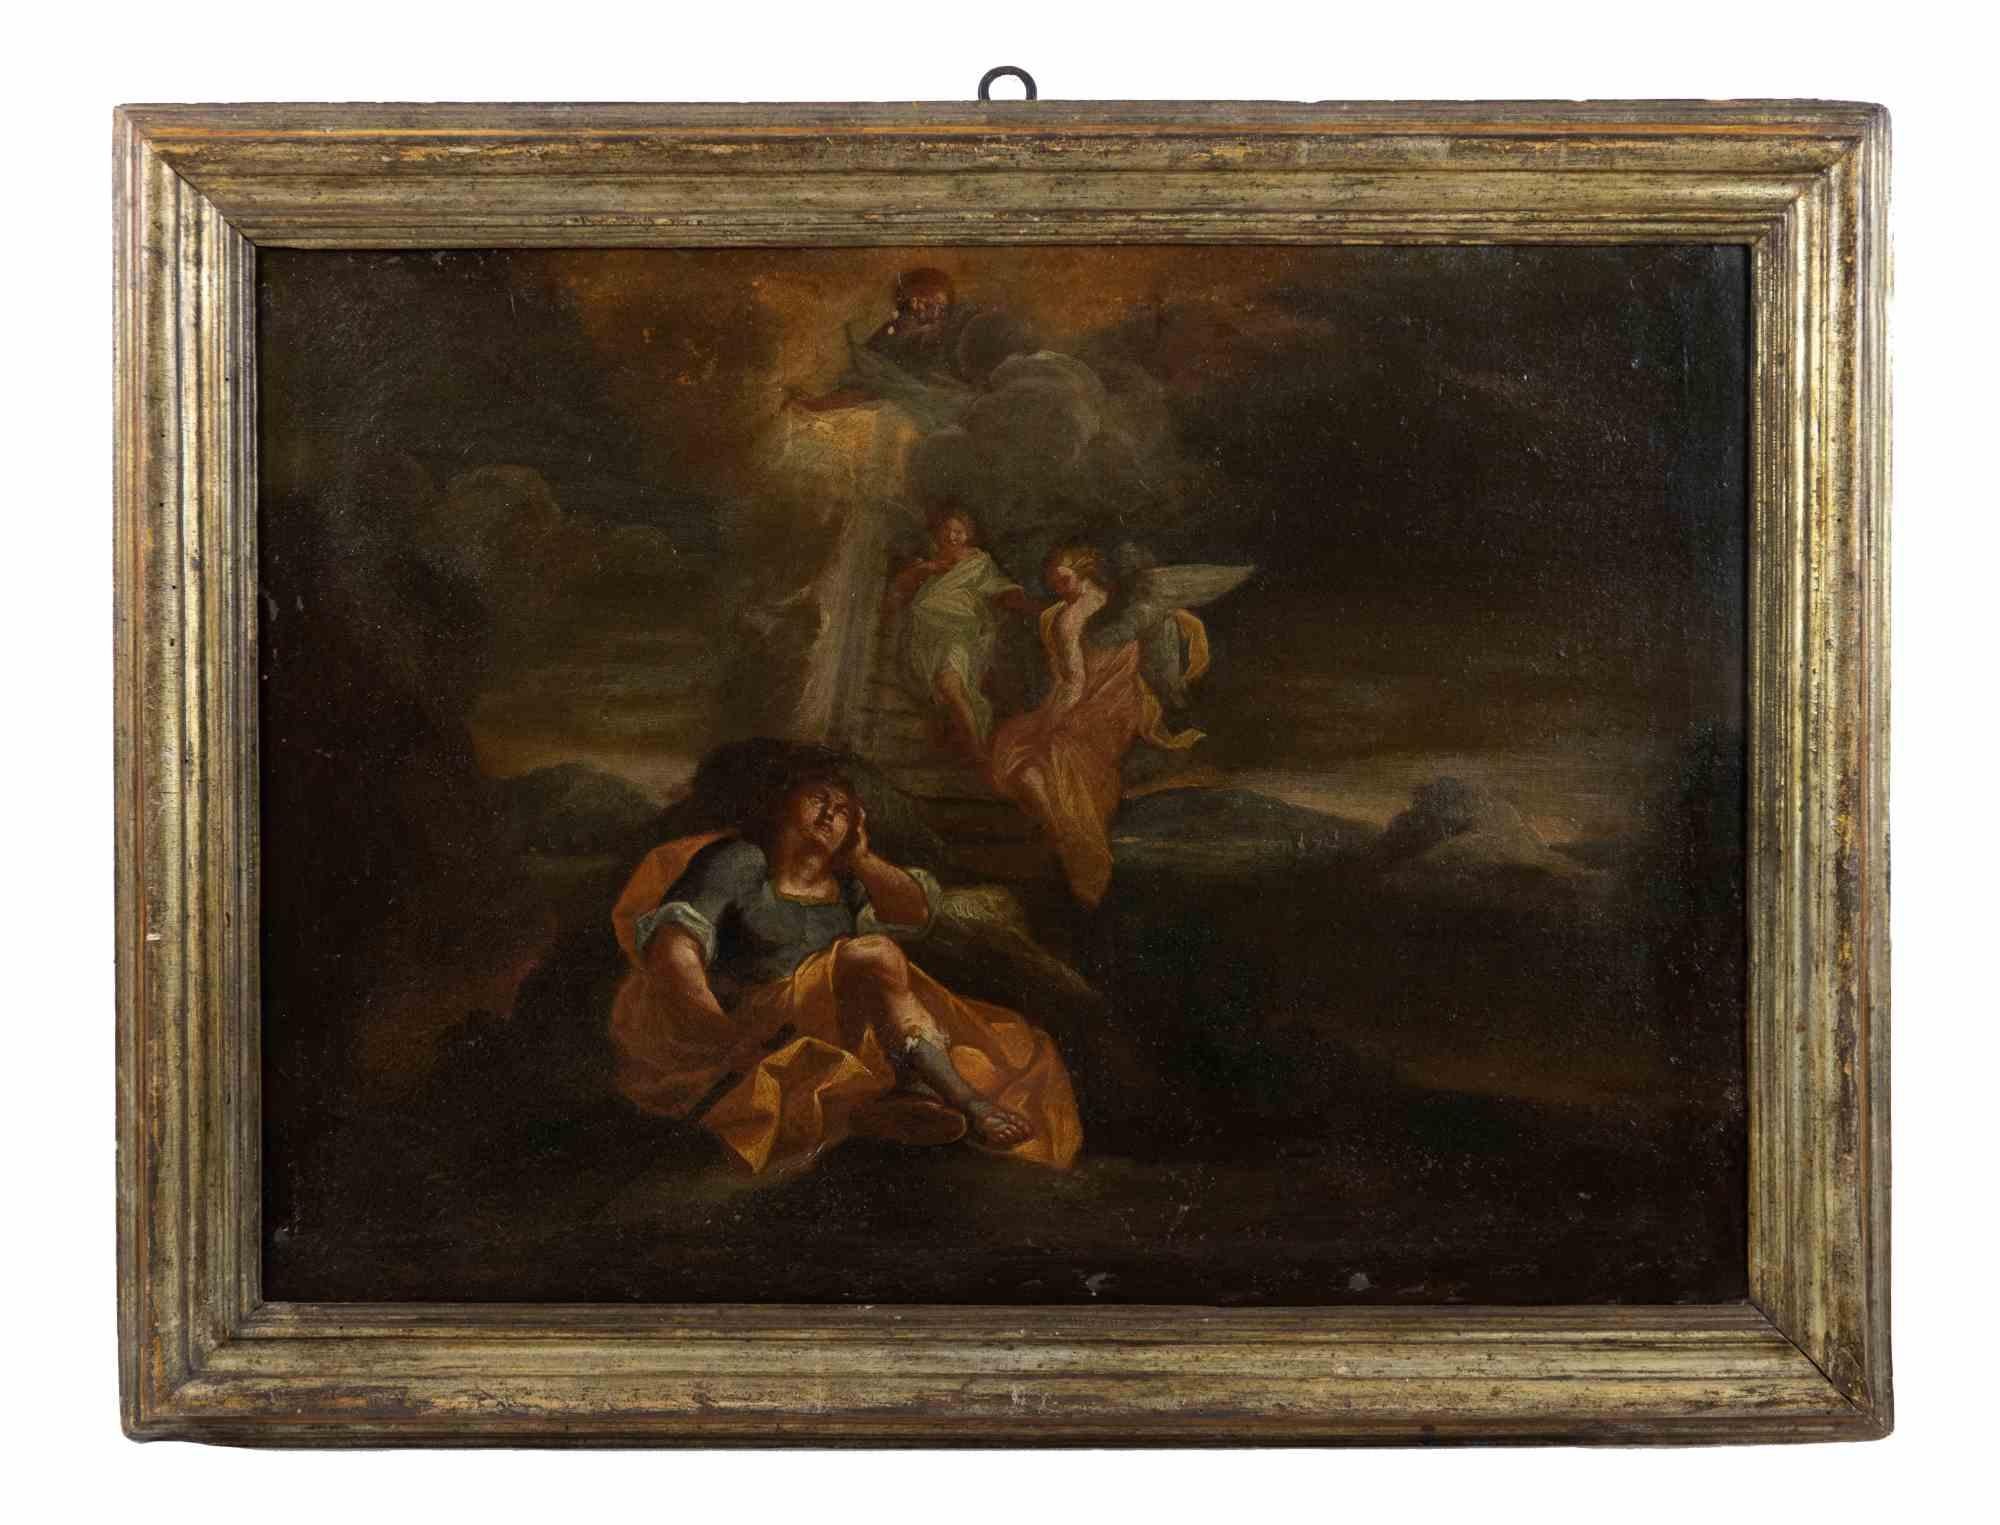 Pair of Religious Scenes - Painting -  18th Century  - Black Figurative Painting by Unknown